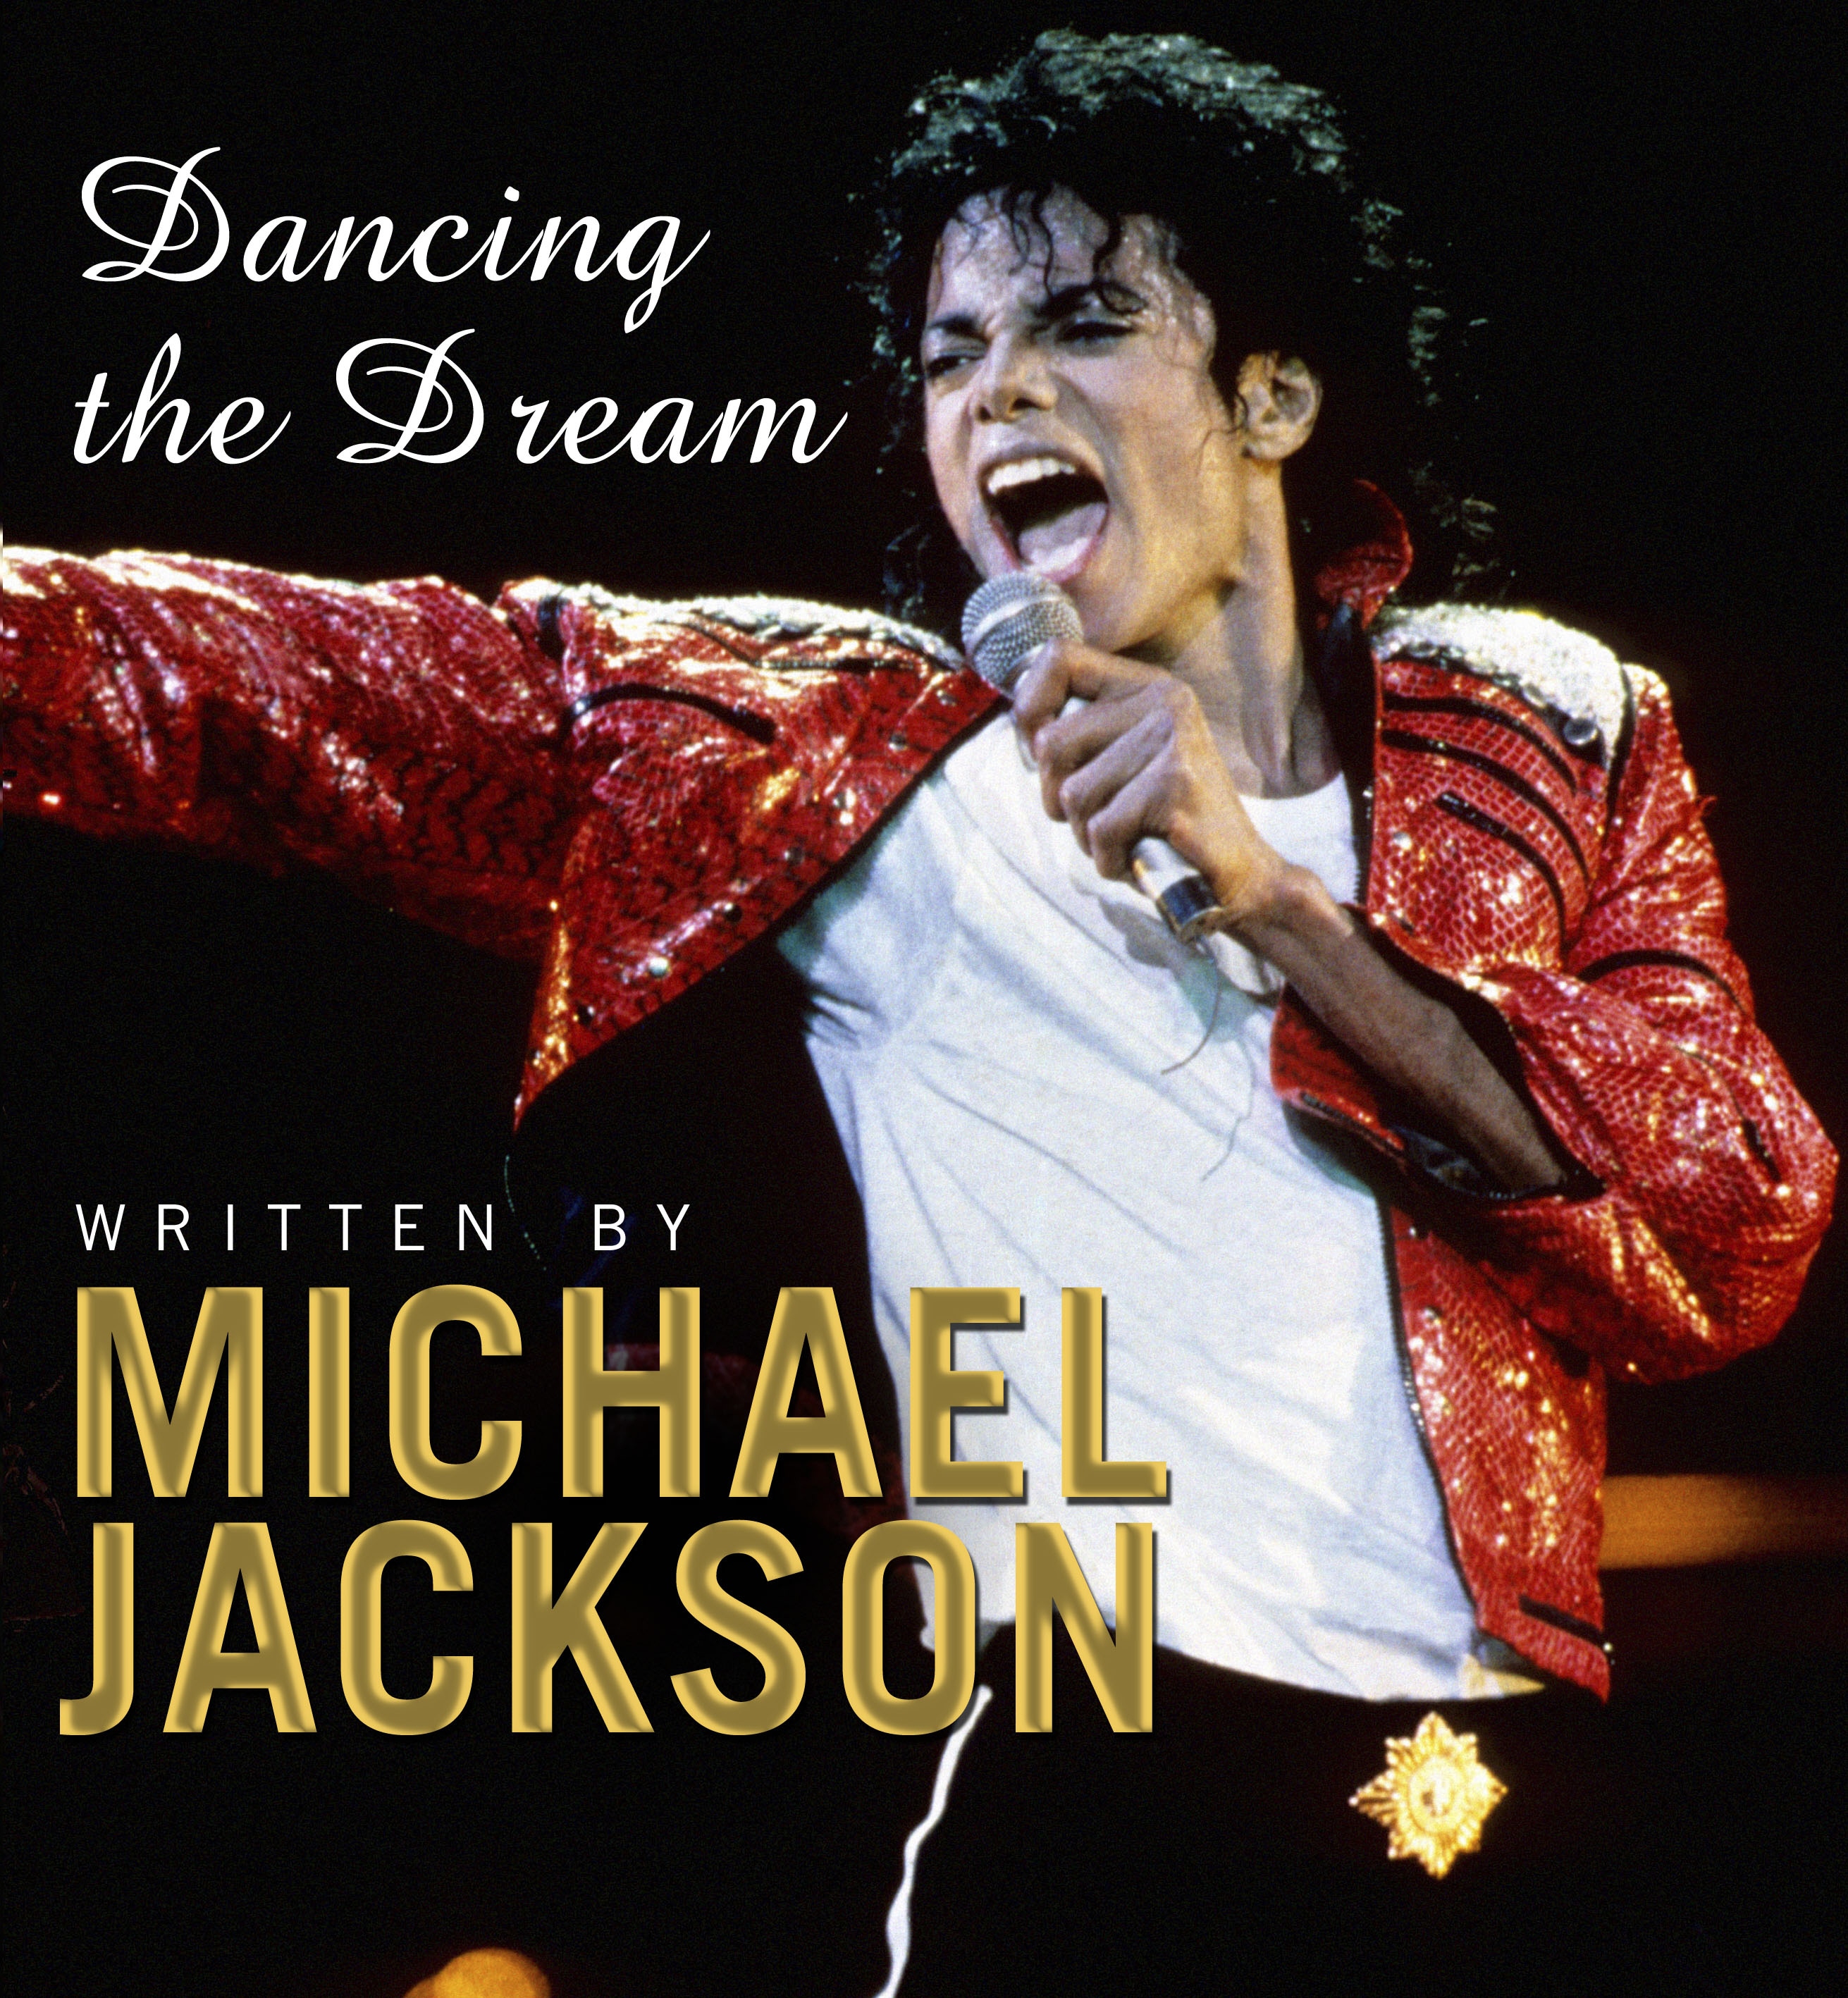 Book “Dancing The Dream” by Michael Jackson — July 1, 1992